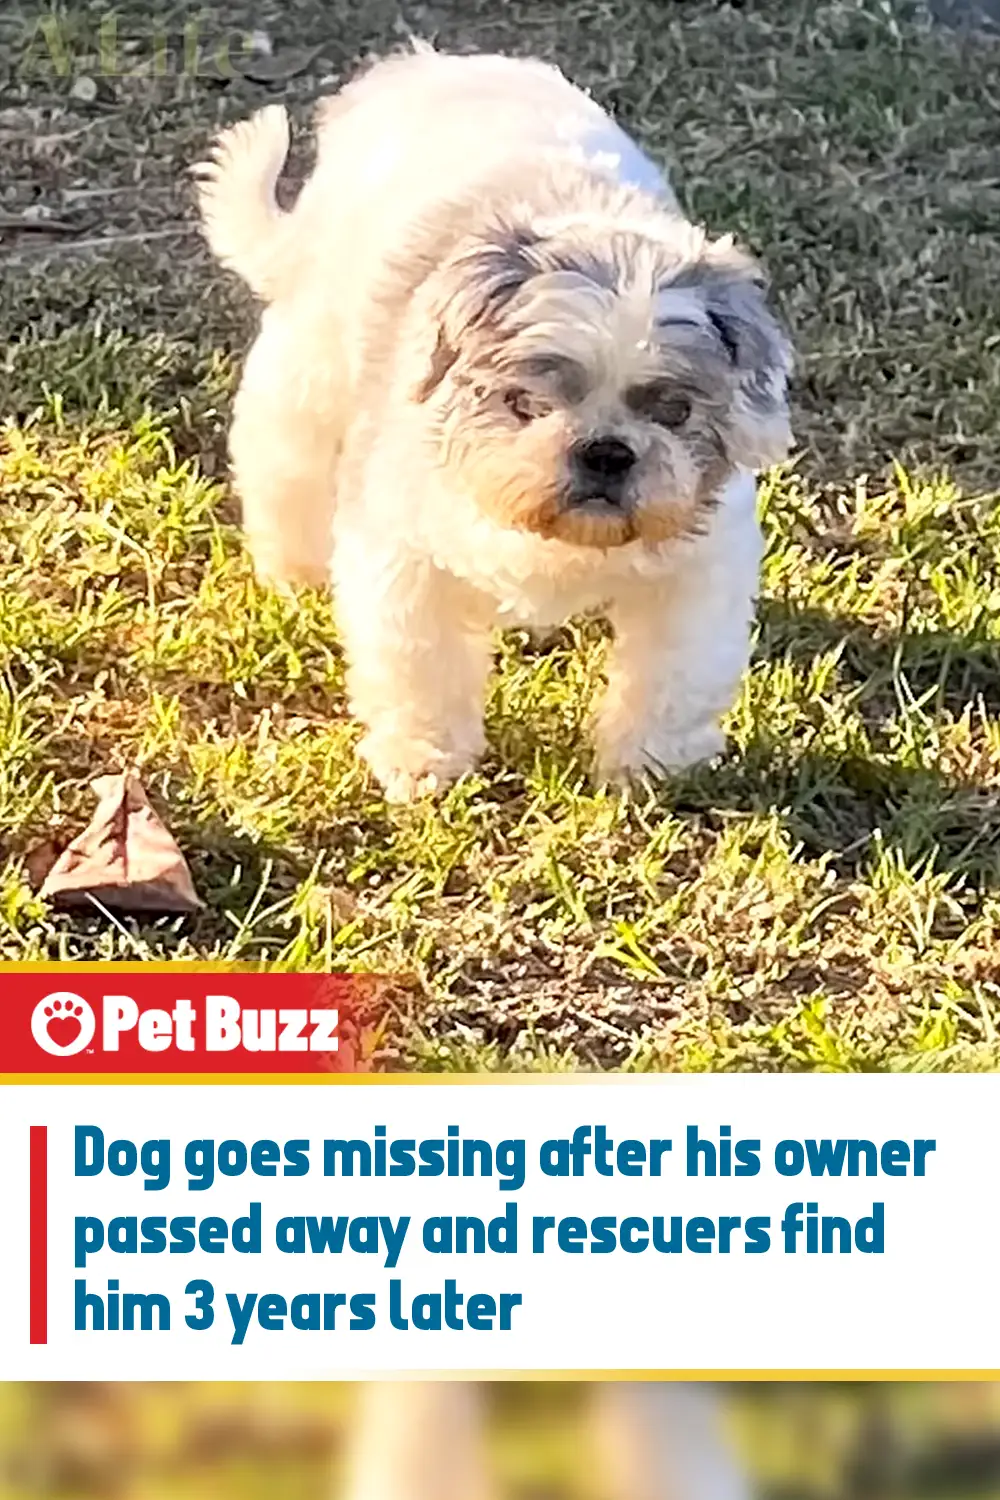 Dog goes missing after his owner passed away and rescuers find him 3 years later